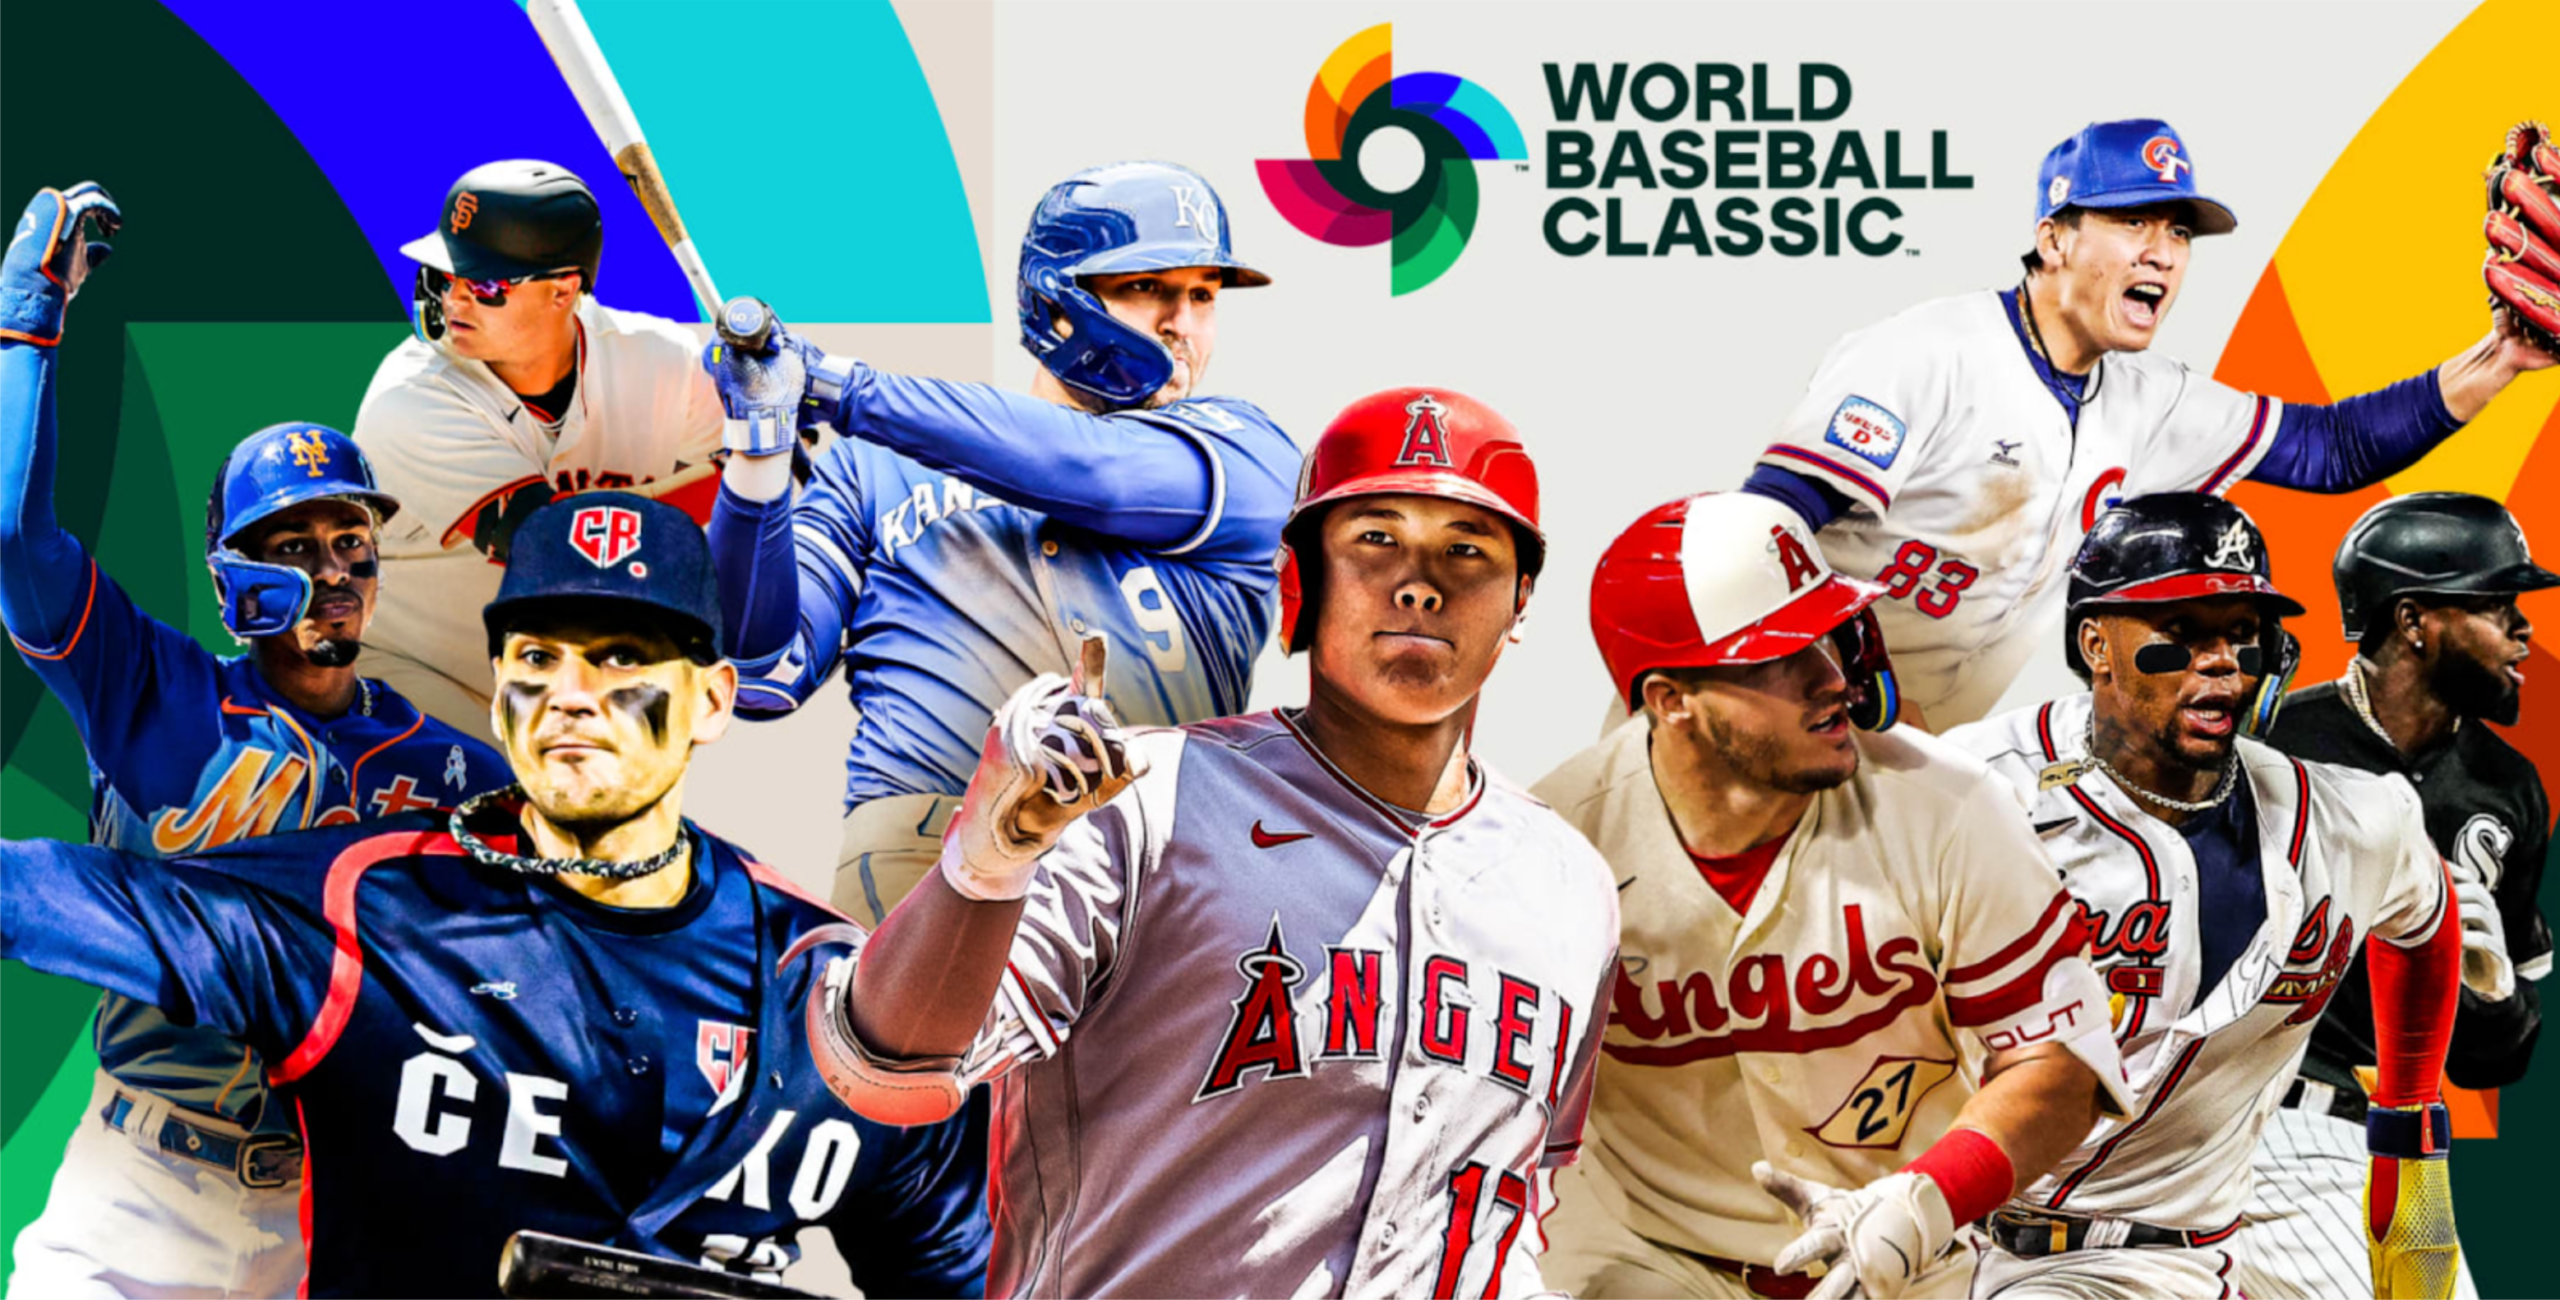 Why You Should Care About the World Baseball Classic